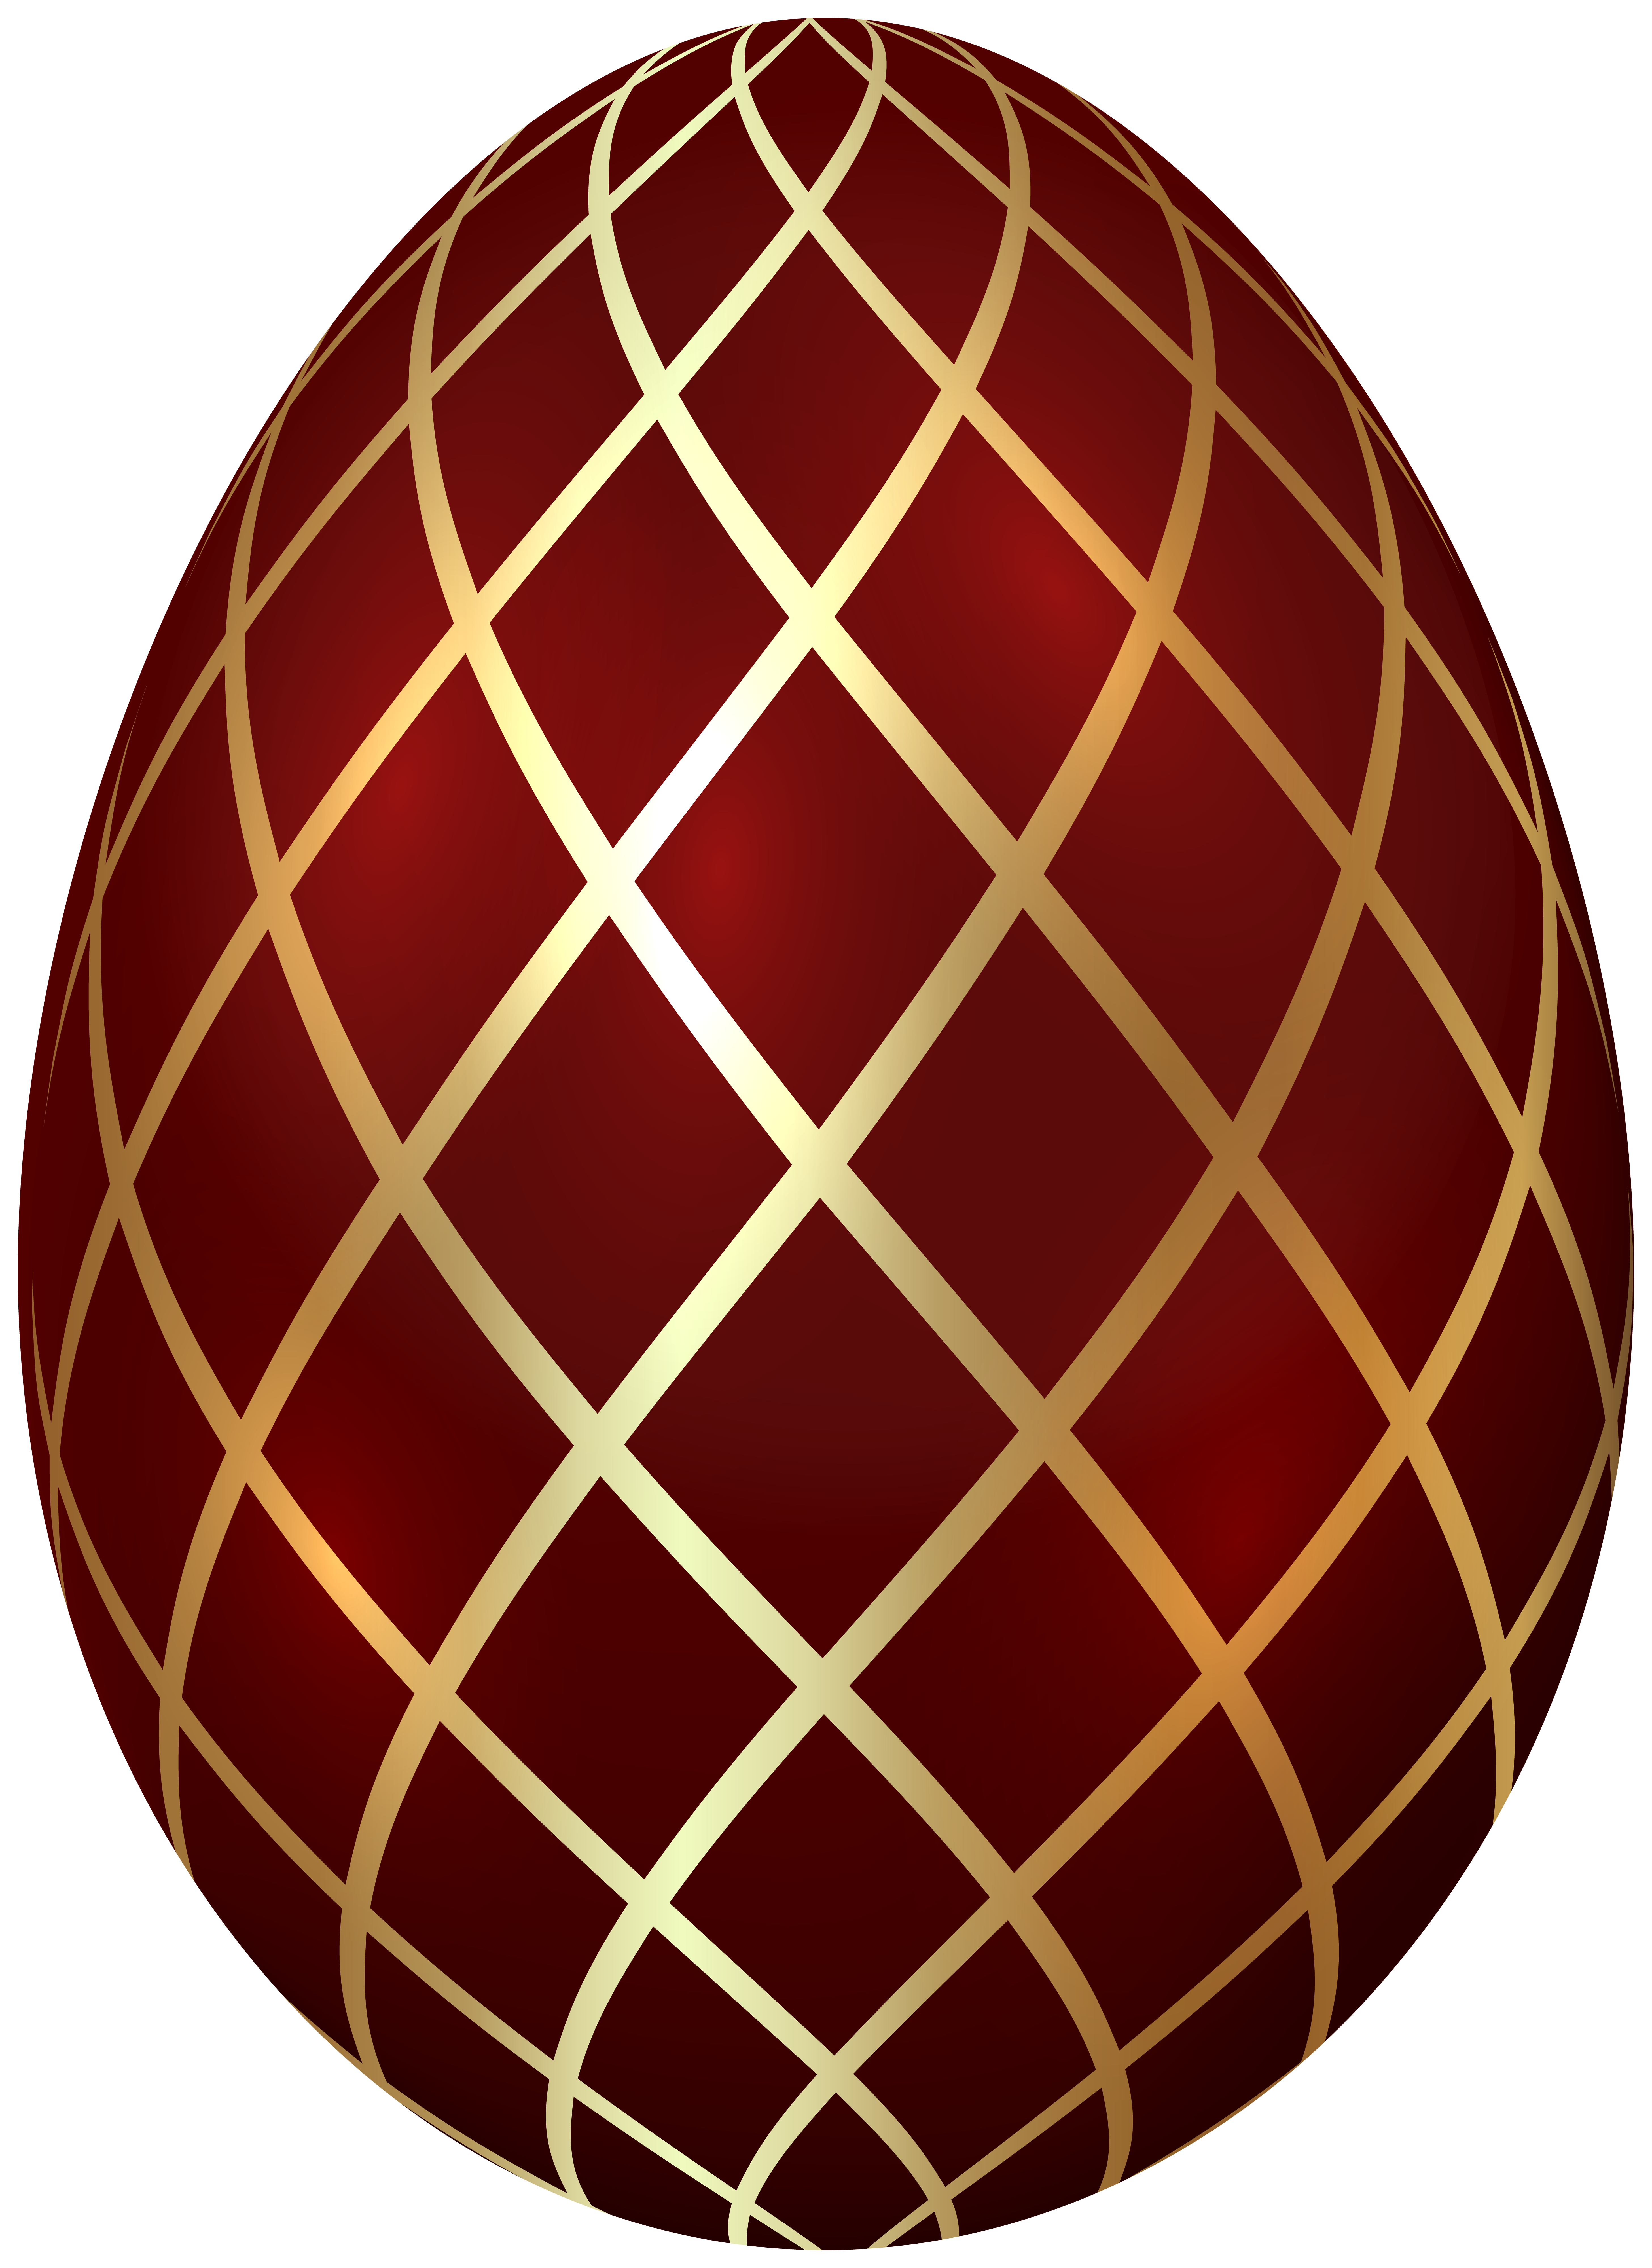 Three Easter Eggs transparent PNG - StickPNG